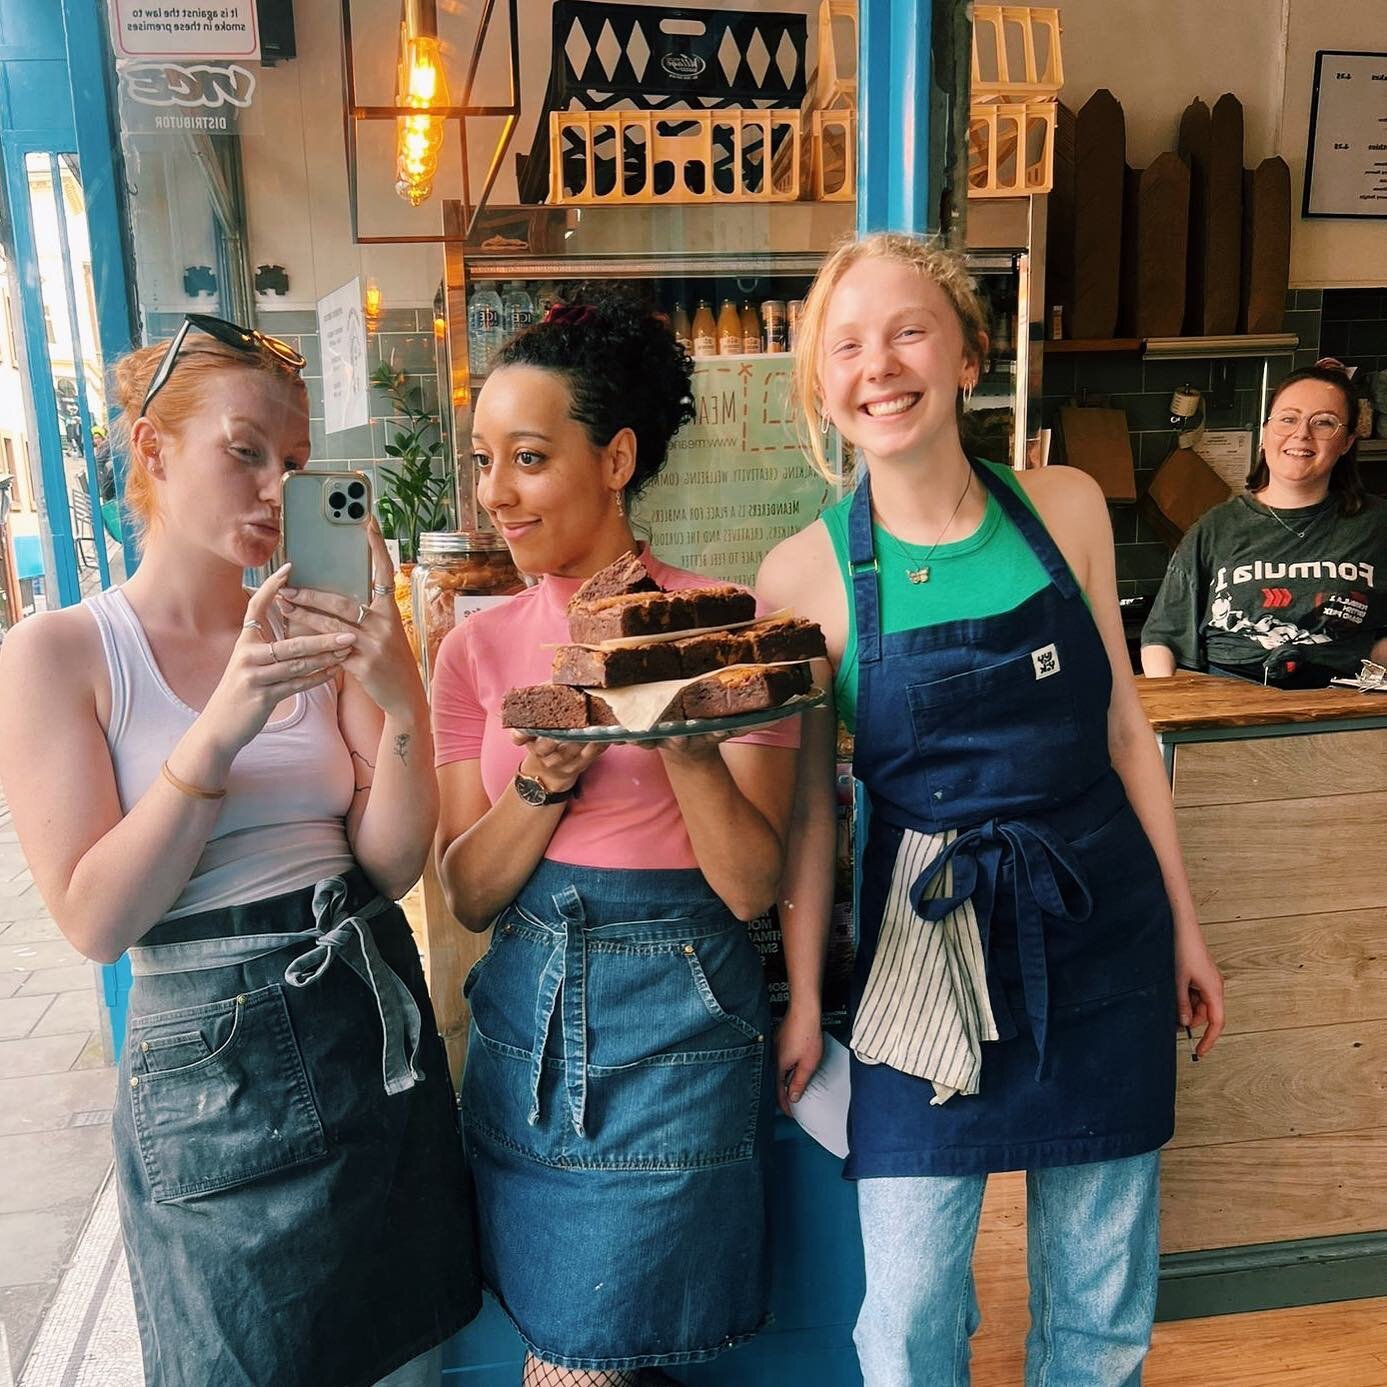 nothing to say but enjoy a photo some of the pelham girls looking cute 🥰 

.
.
.
.
.
.
.
.
.
.
.
.
.
#nottingham #notts #lovenotts #indienotts #visitnottingham #cafe #hockley #cafes #breakfast #brunch #lunch #cake #coffee #cakeandcoffee #shoplocal #